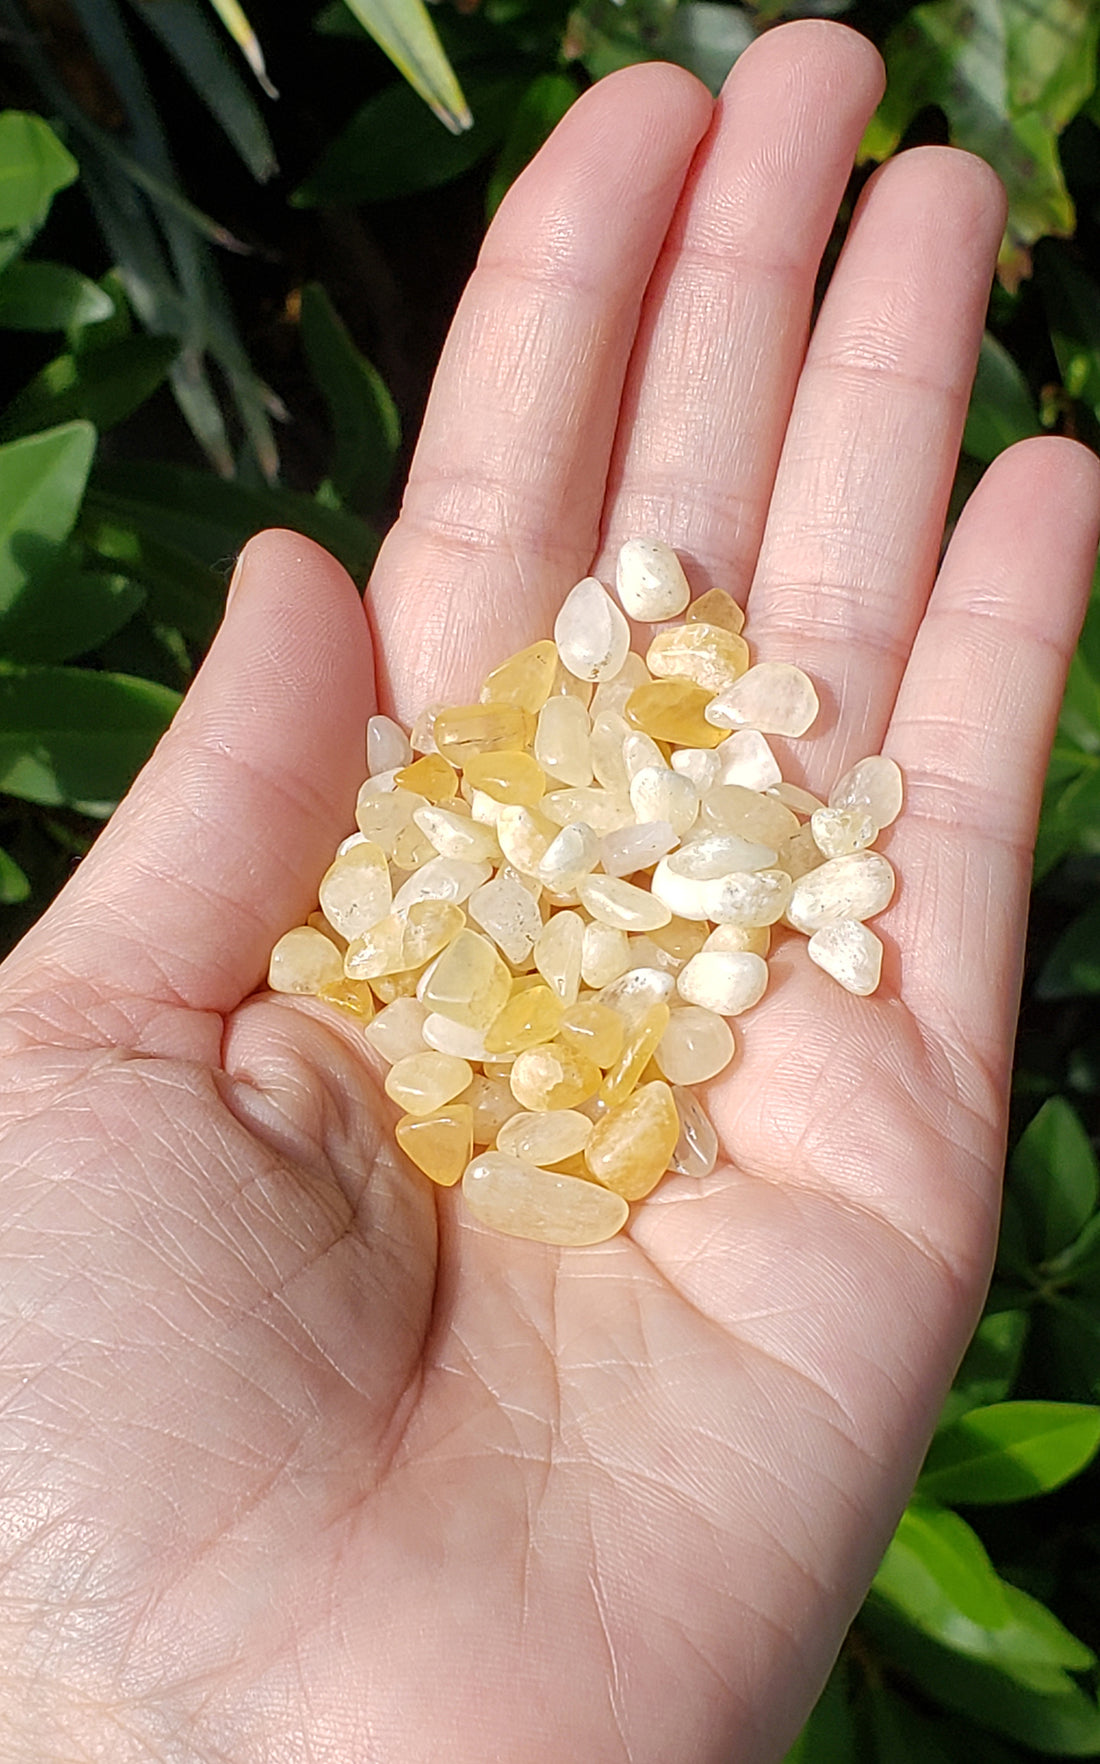 Yellow Calcite Gemstone Chips - 1 Ounce Bag